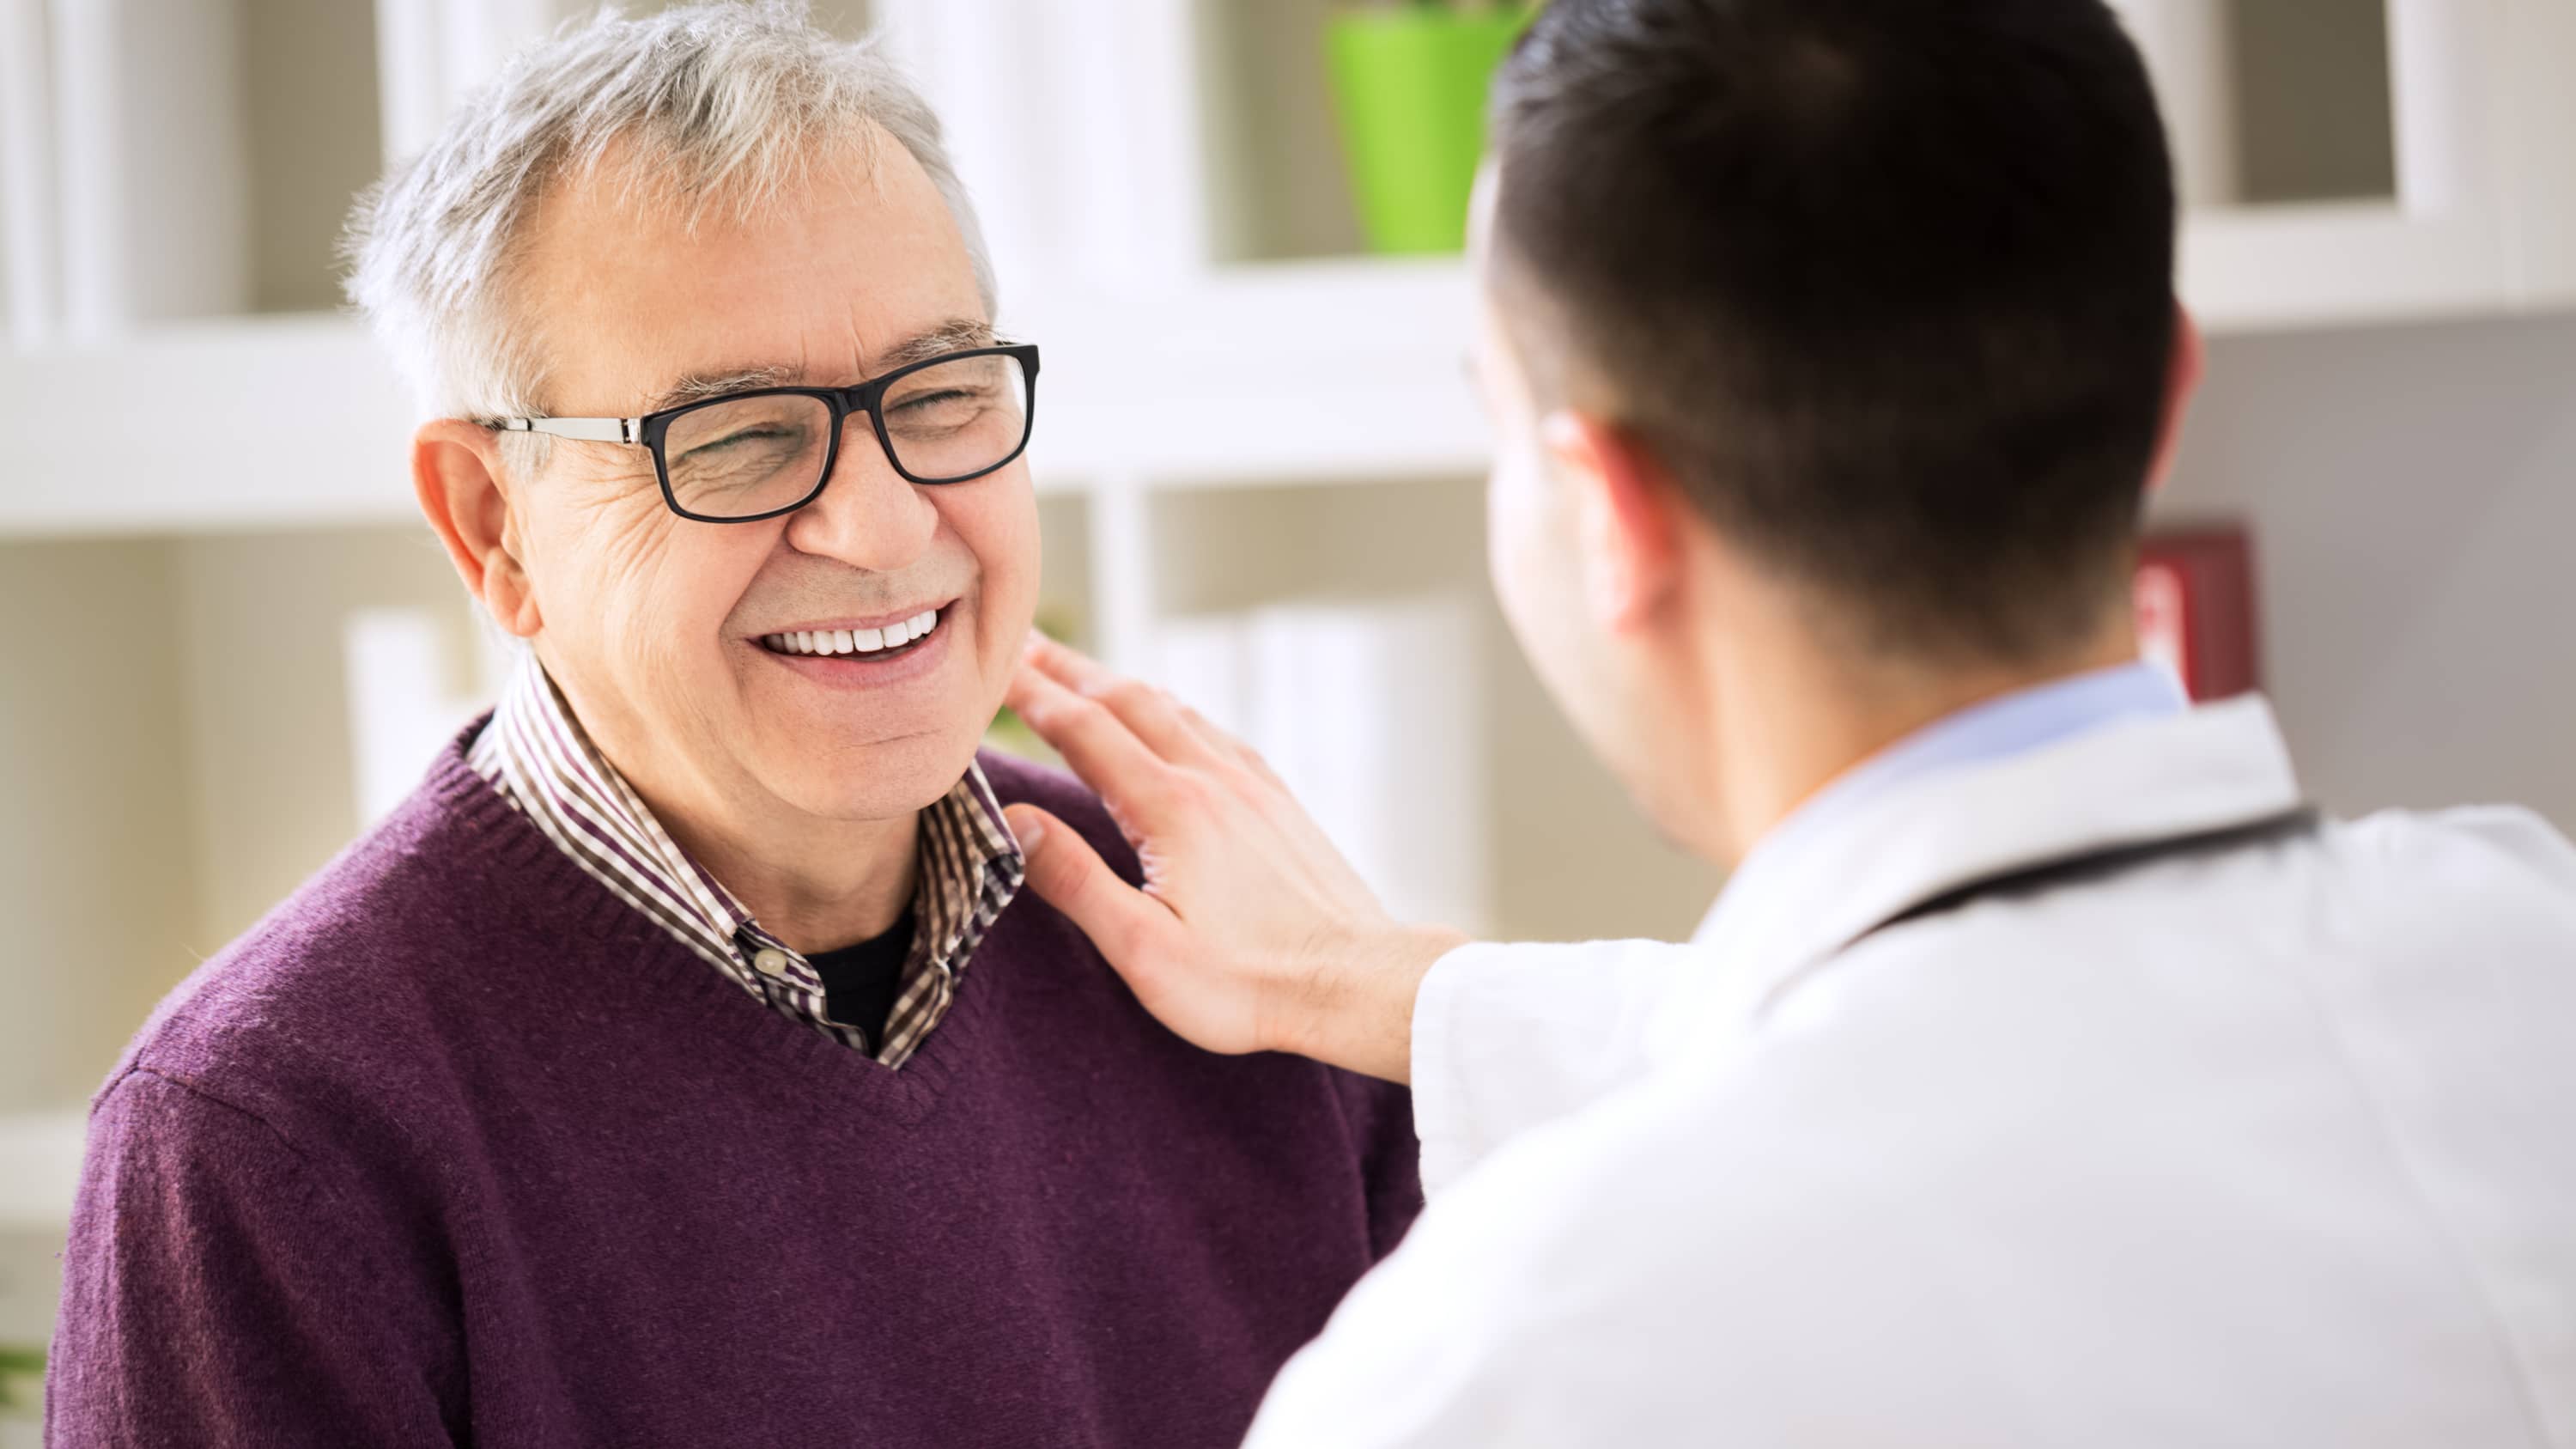 A patient possibly discussing prostate artery embolisation with his doctor.